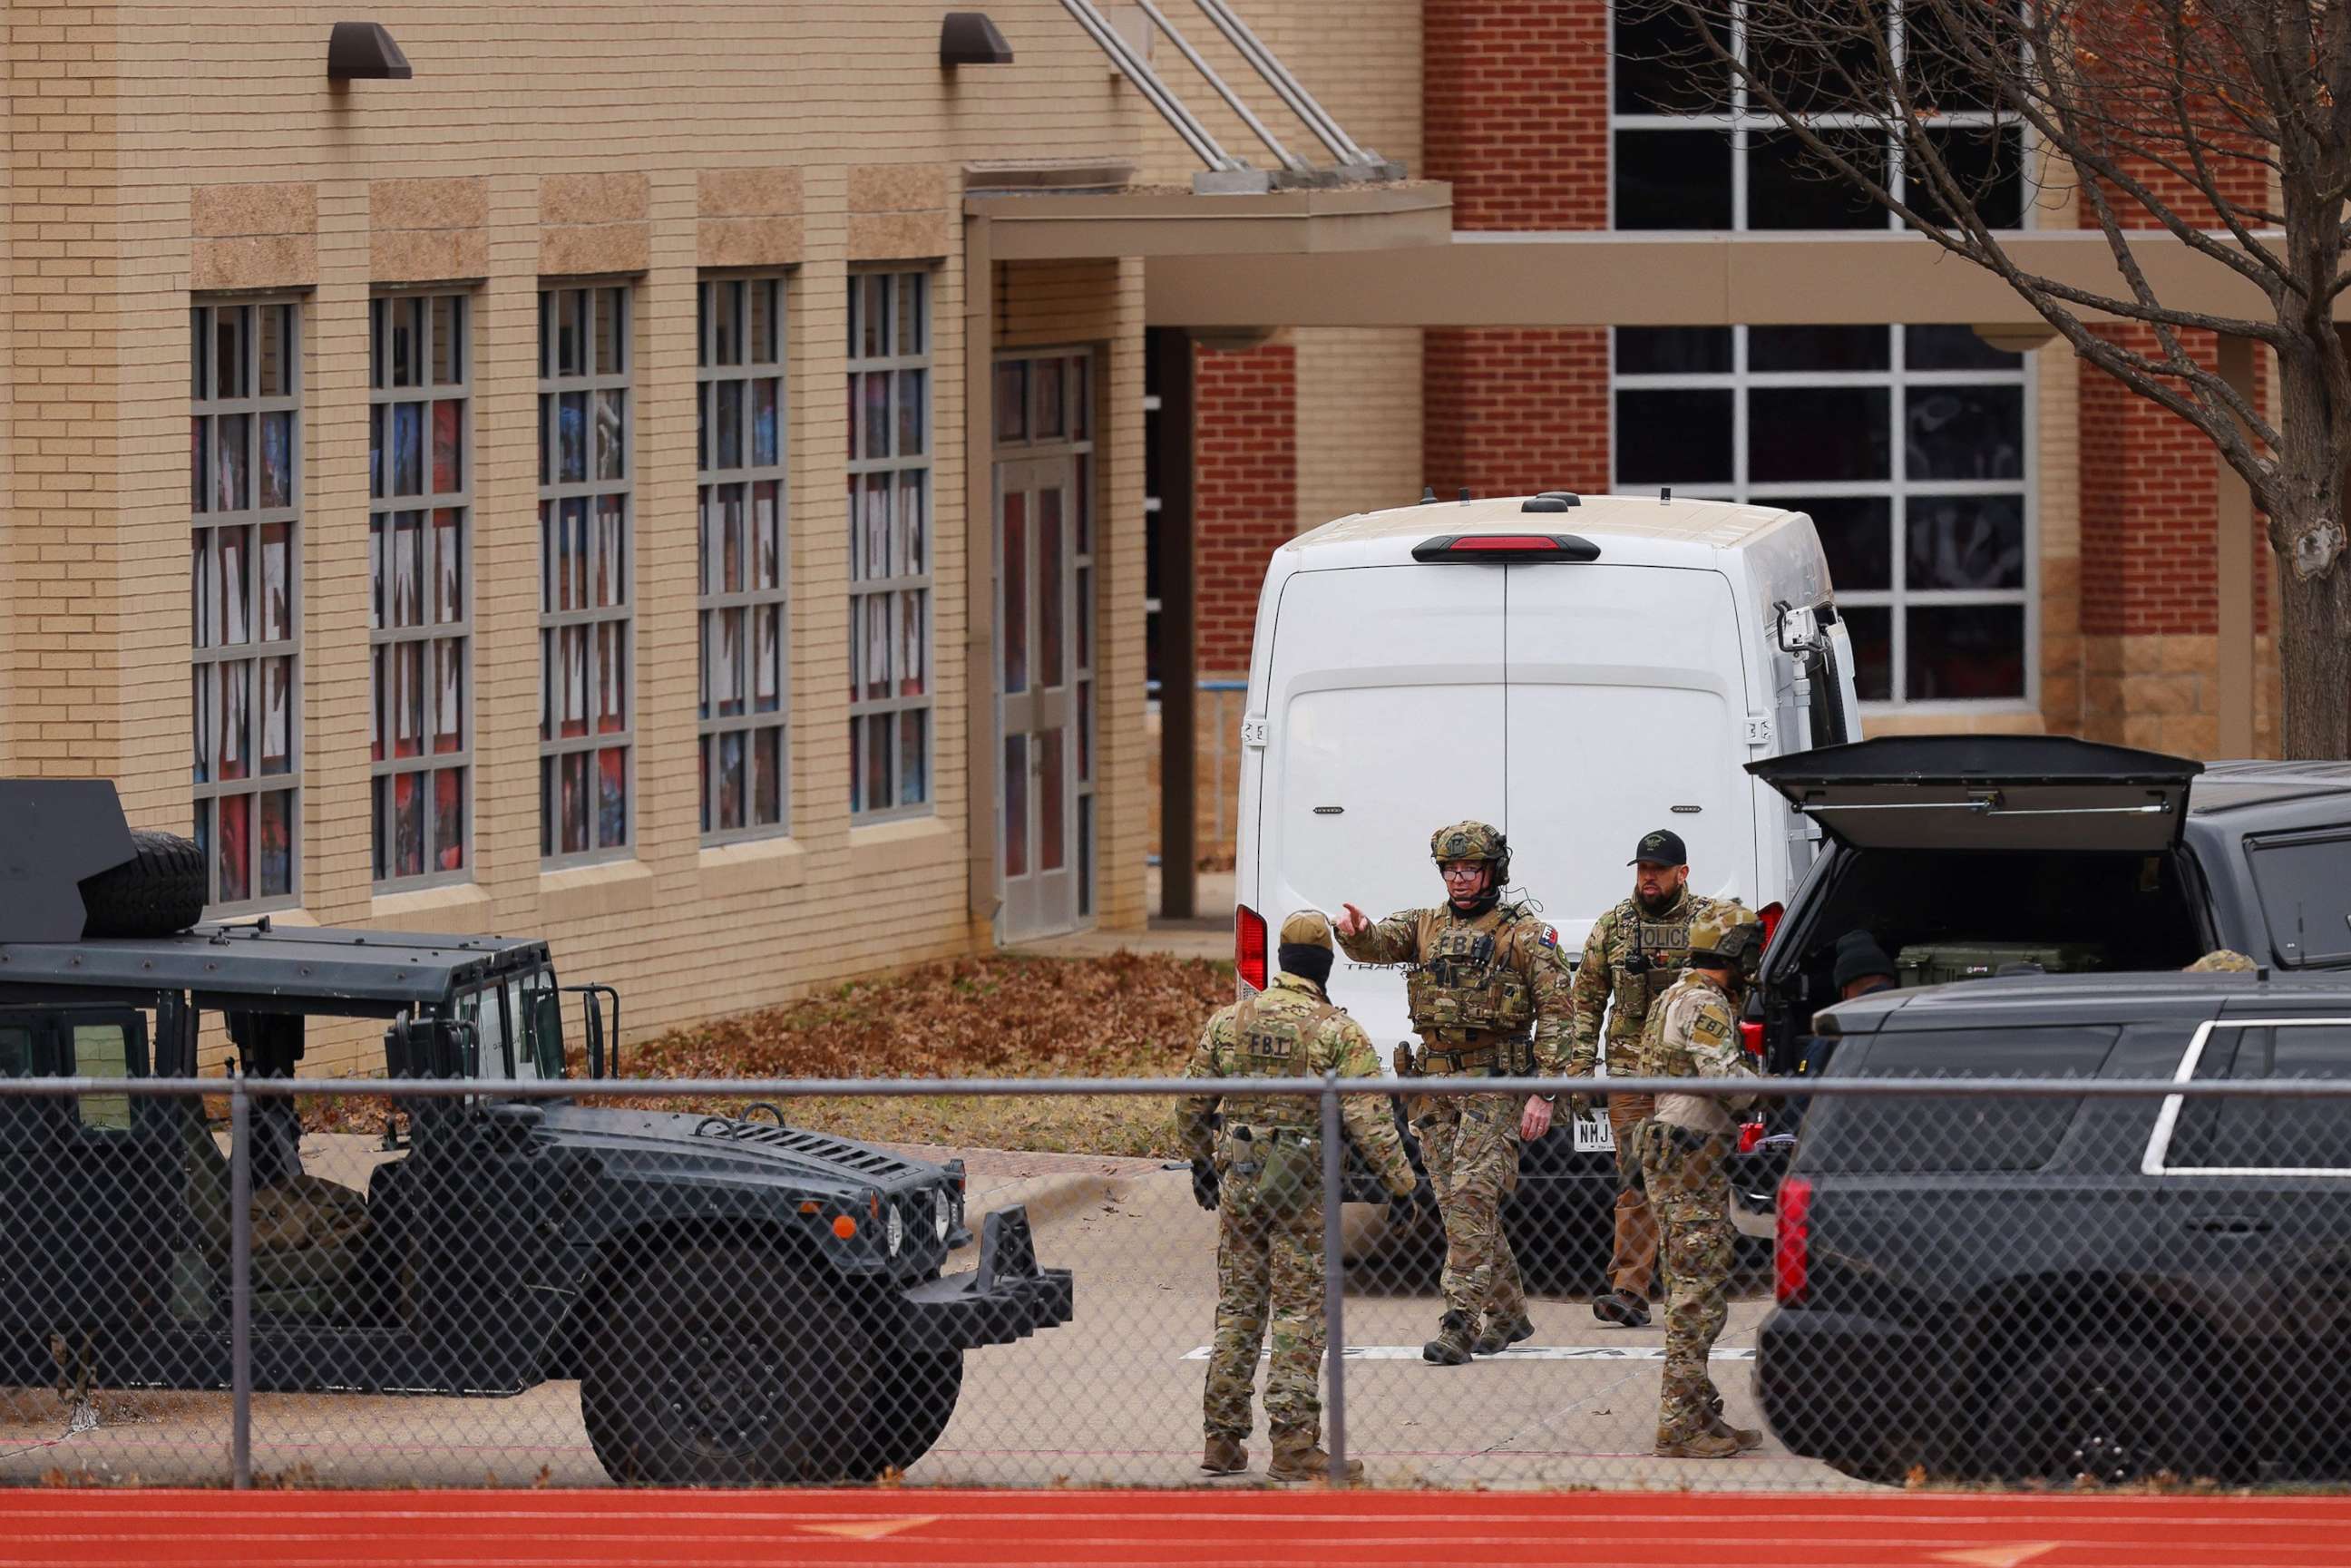 PHOTO: SWAT team members deploy near the Congregation Beth Israel Synagogue in Colleyville, Texas, Jan. 15, 2022.